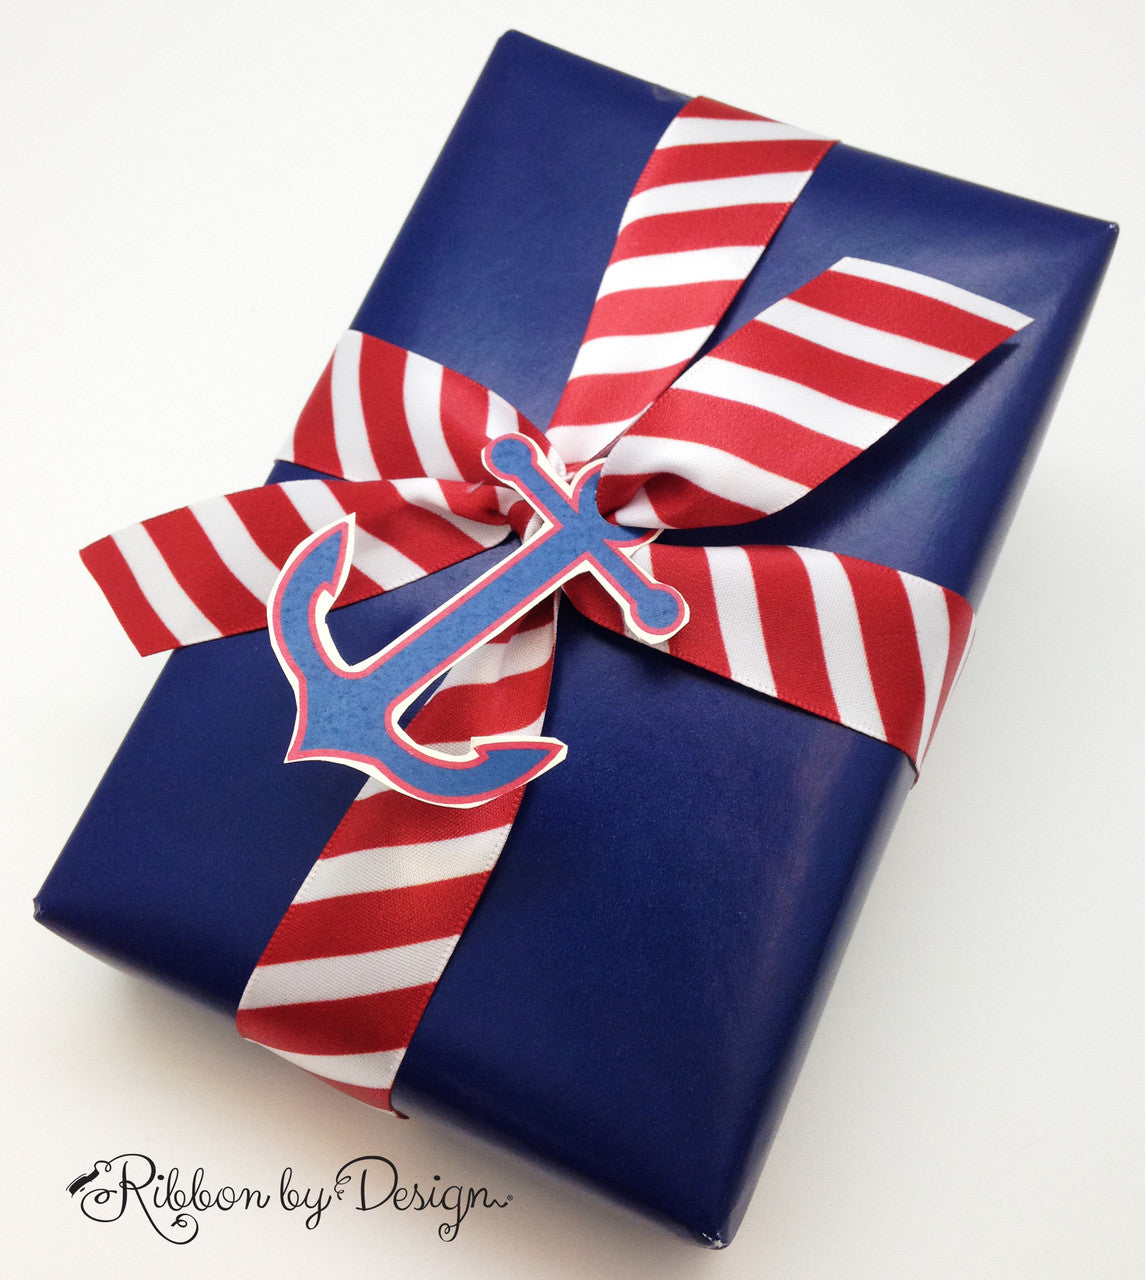 Our handsome red and white stripes are striking a nautical pose on this little gift tied with an anchor card!